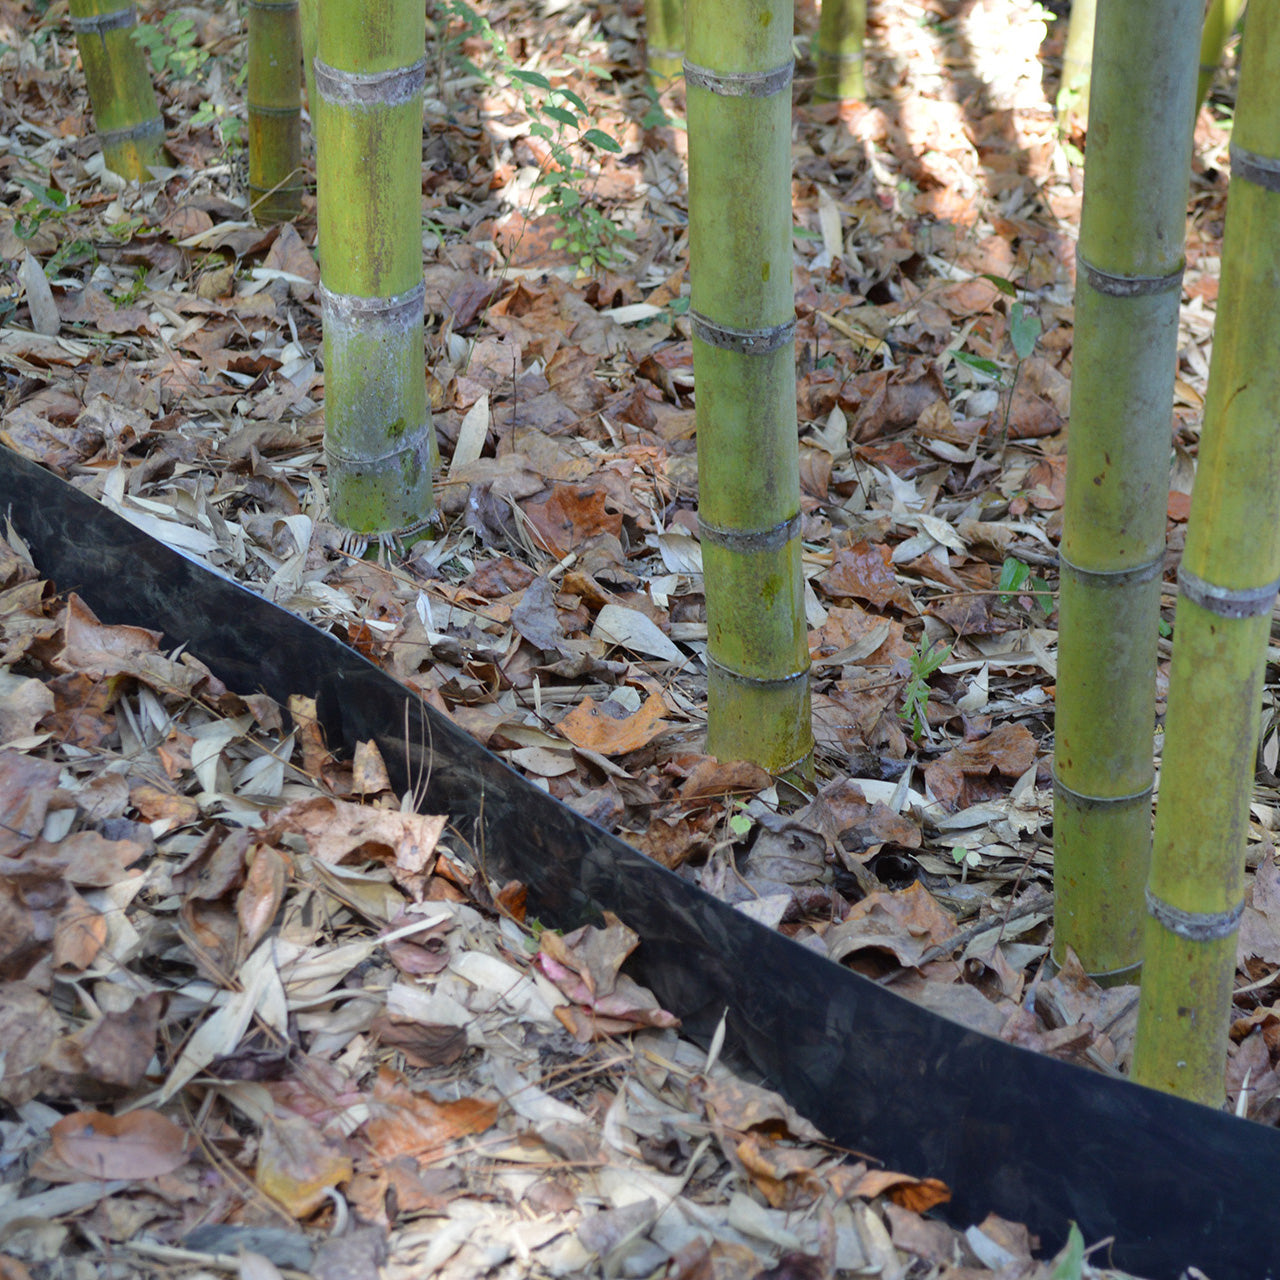 Bamboo Shield for Colder Climates – 60 mil thick x 24″ depth